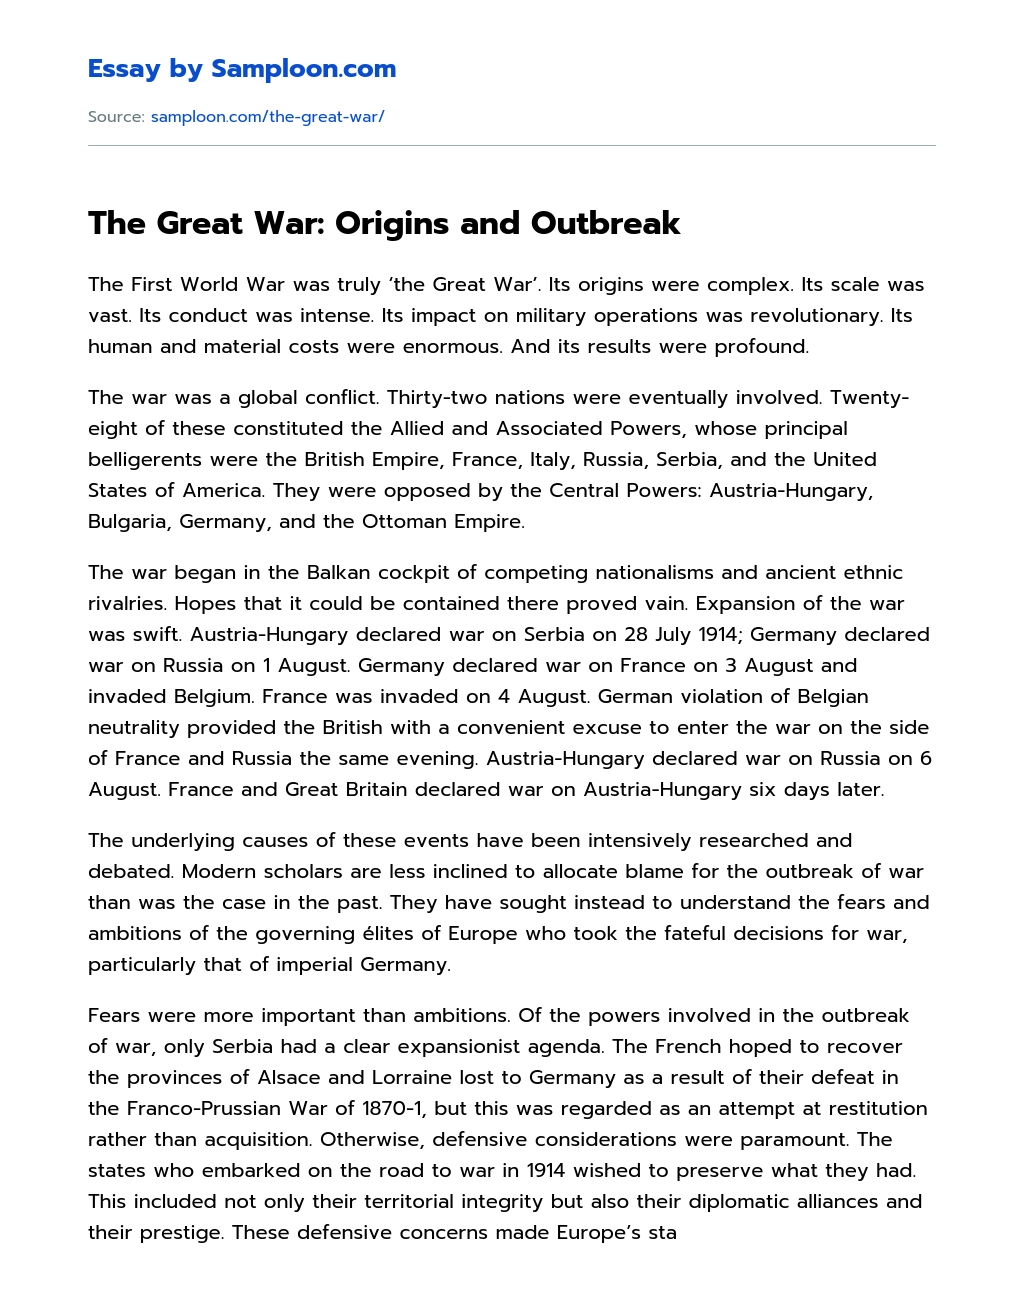 The Great War: Origins and Outbreak essay